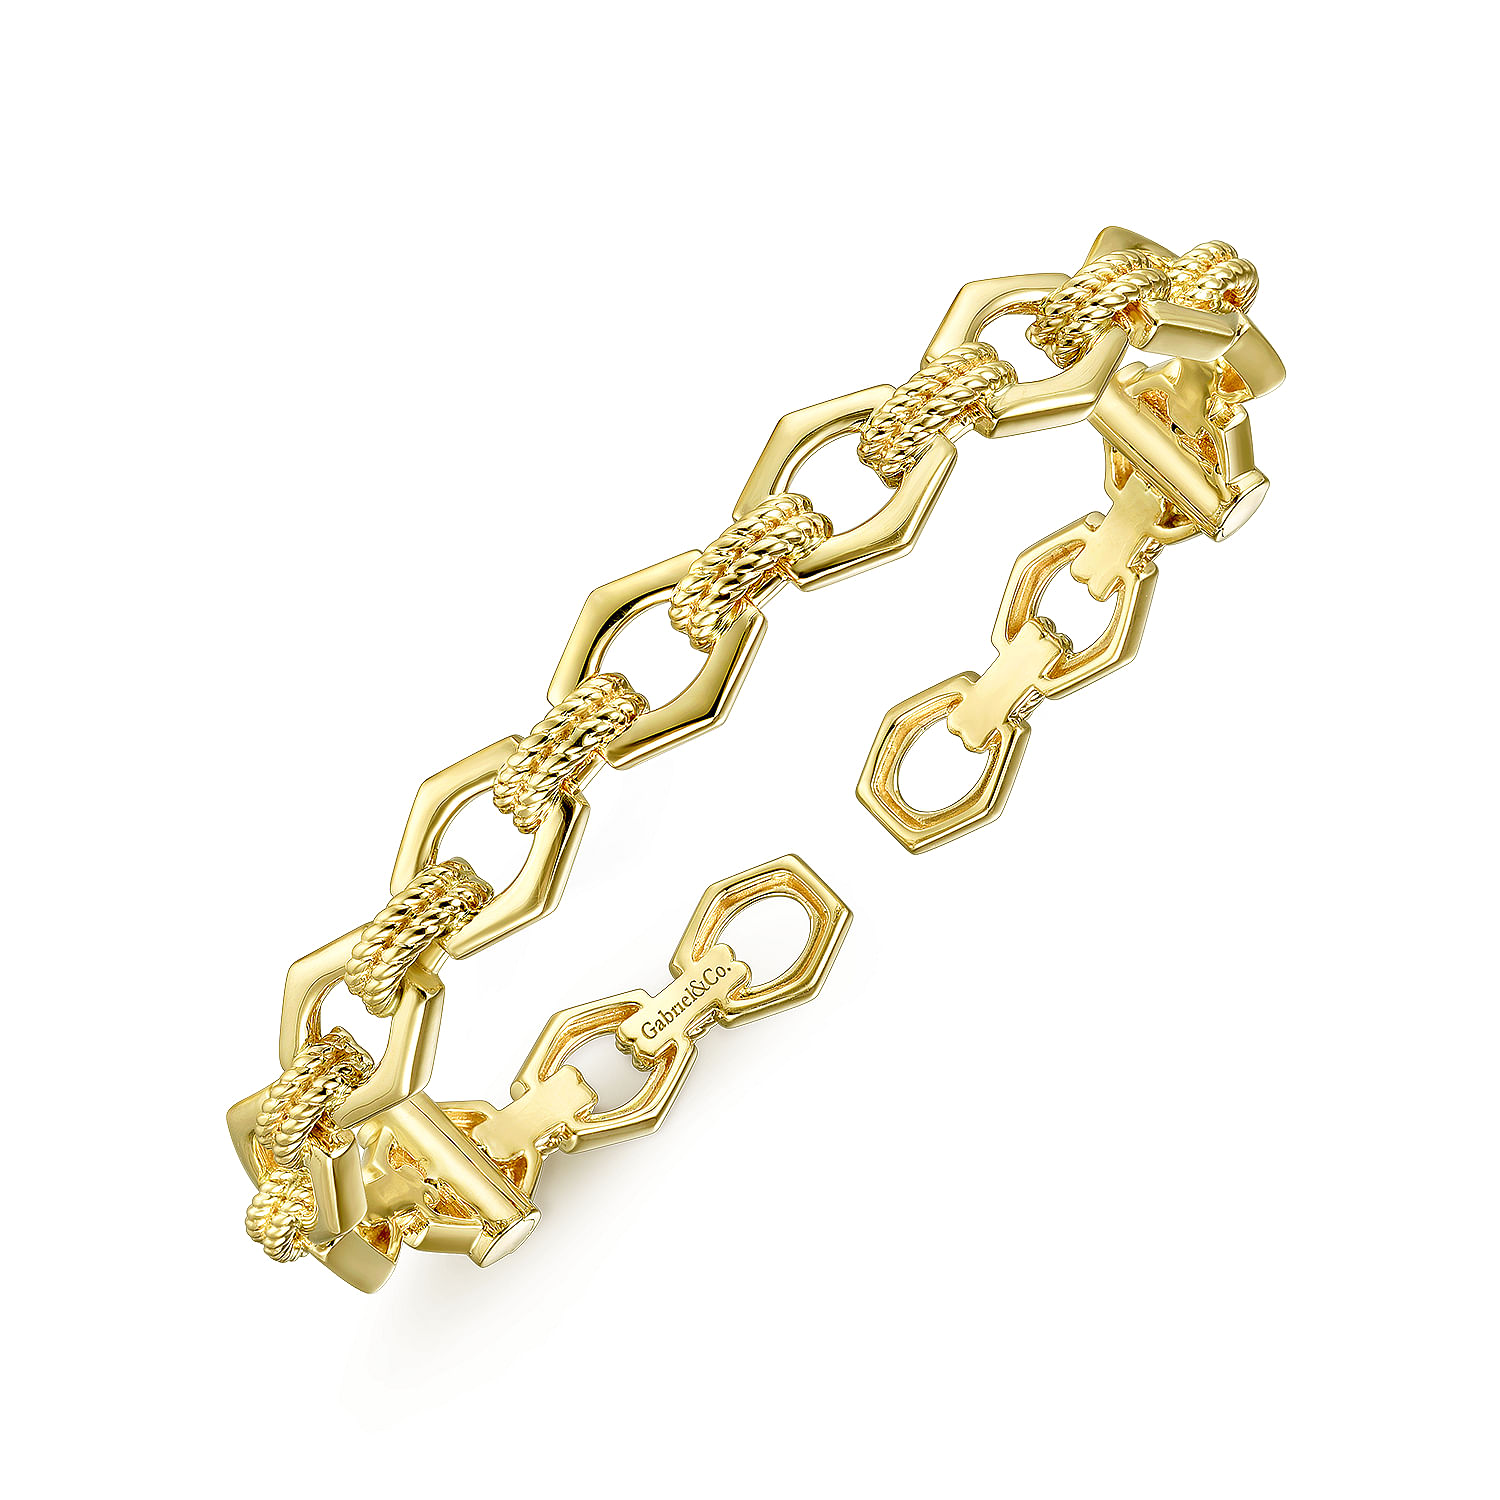 14K Yellow Gold High Polished Chain Link Cuff Bracelet with Twisted Rope Connectors